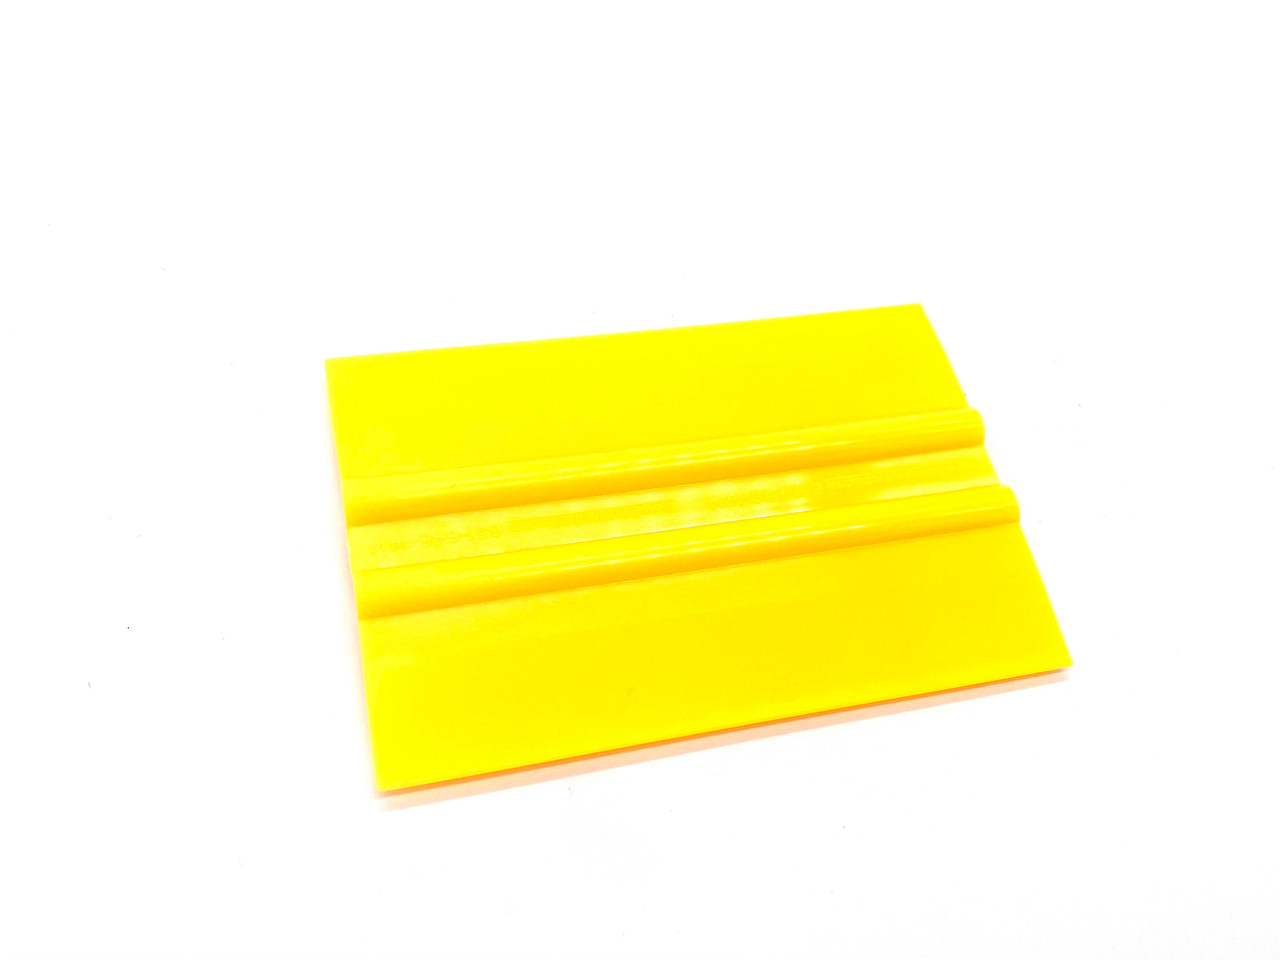 4″ Gray Lidco Squeegee